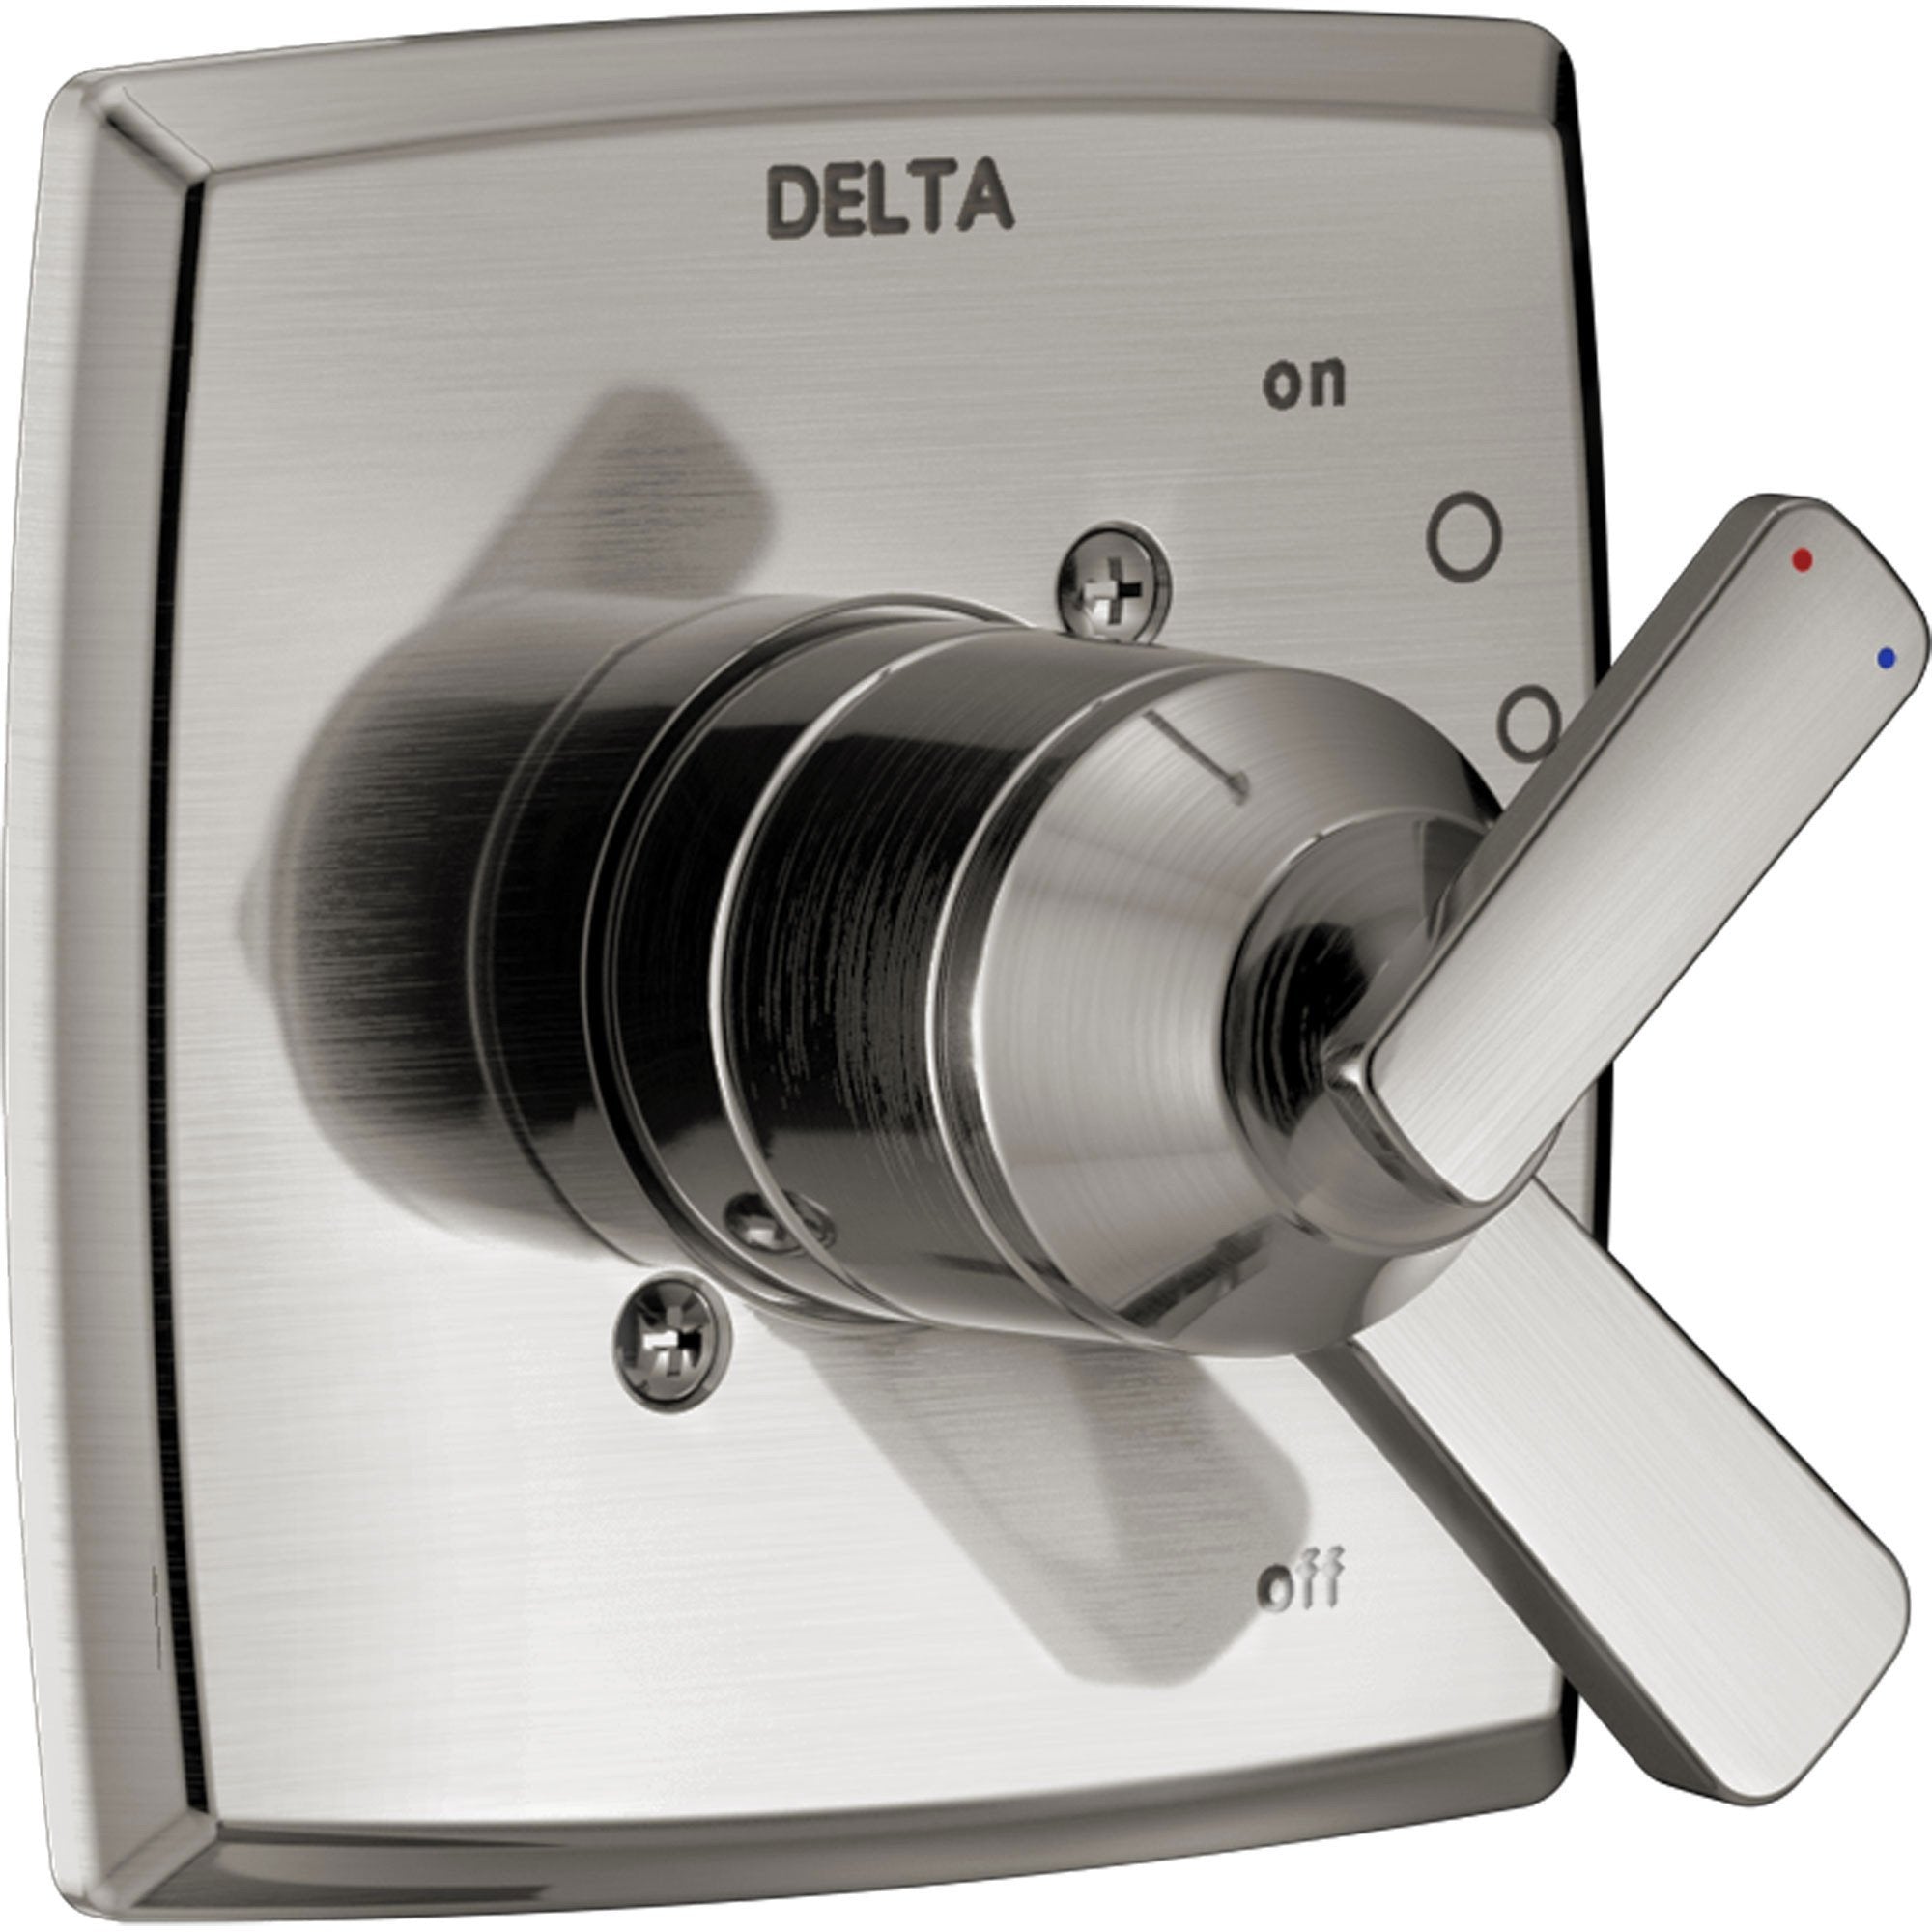 Delta Ashlyn Modern Stainless Steel Finish 17 Series Dual Temperature and Pressure Shower Faucet Control INCLUDES Rough-in Valve D1152V